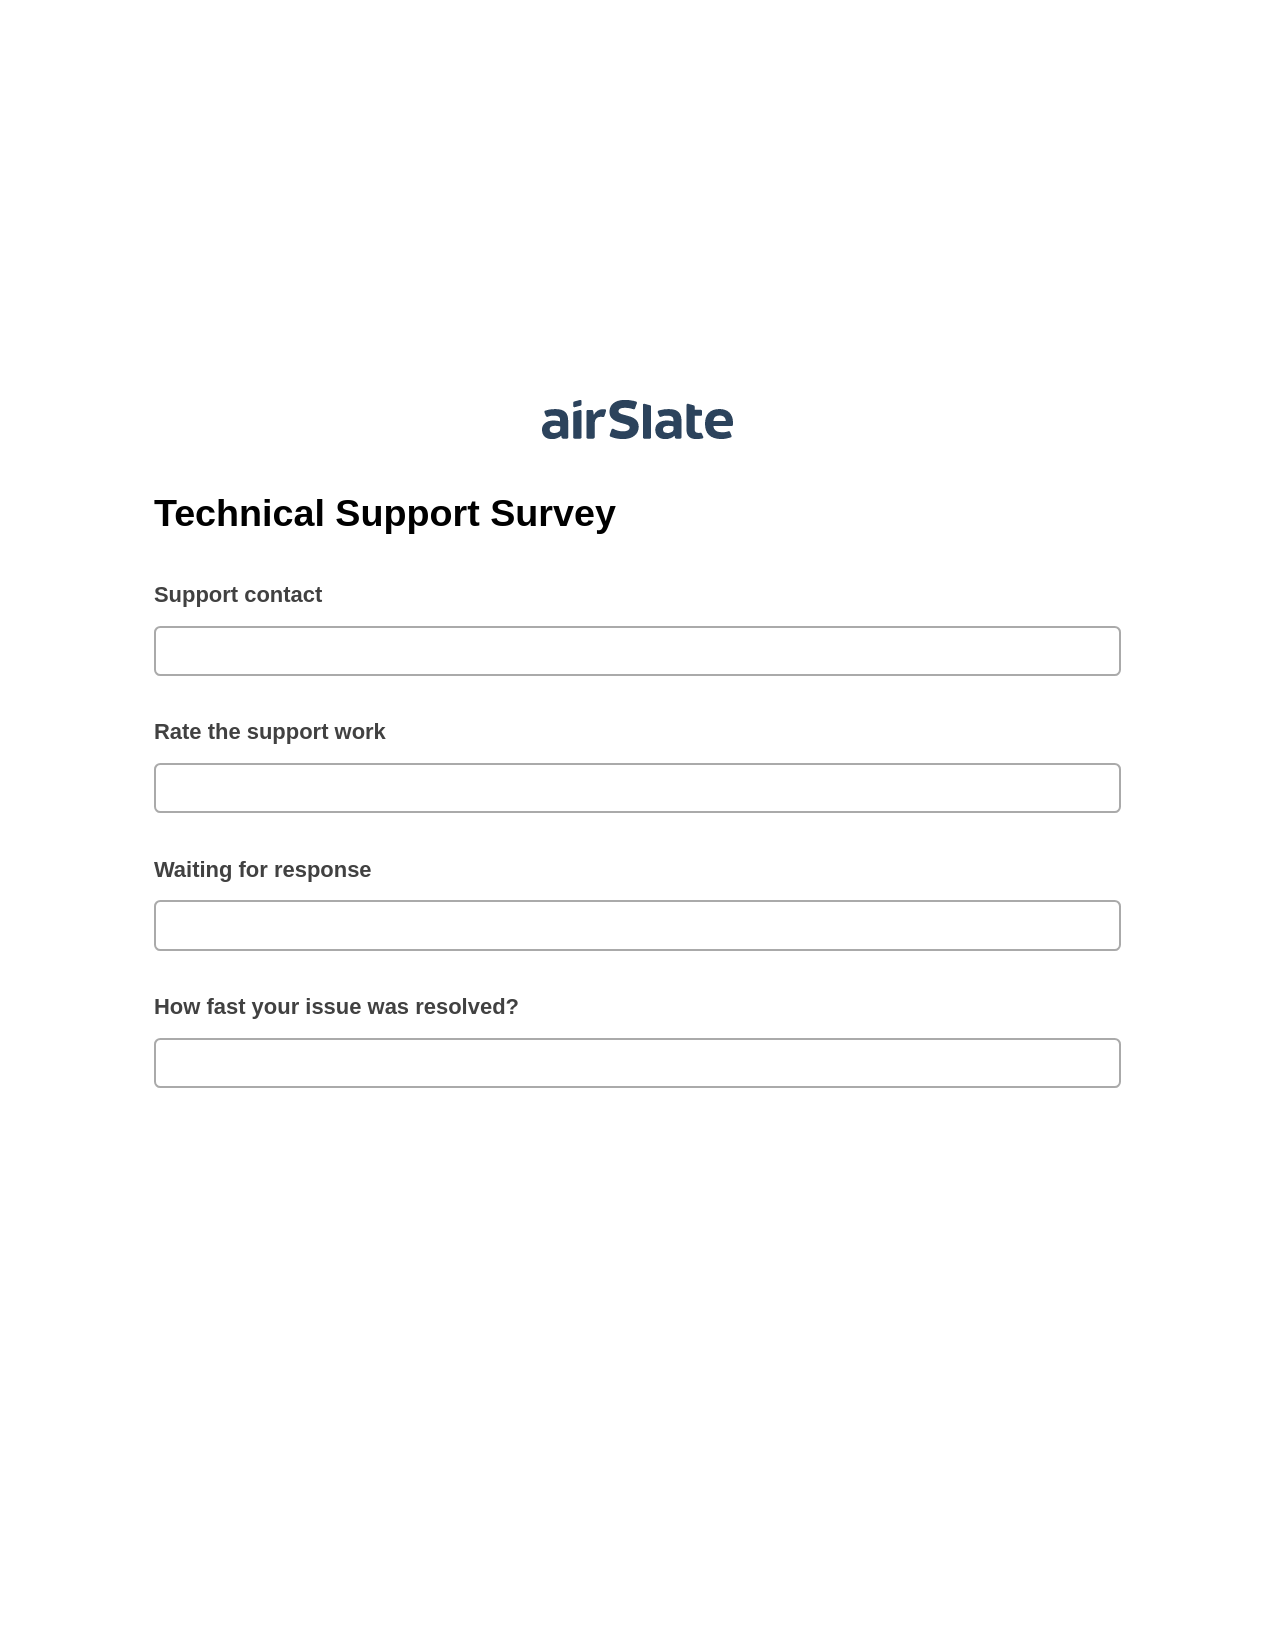 Multirole Technical Support Survey Pre-fill from CSV File Bot, Hide Signatures Bot, Export to Salesforce Record Bot